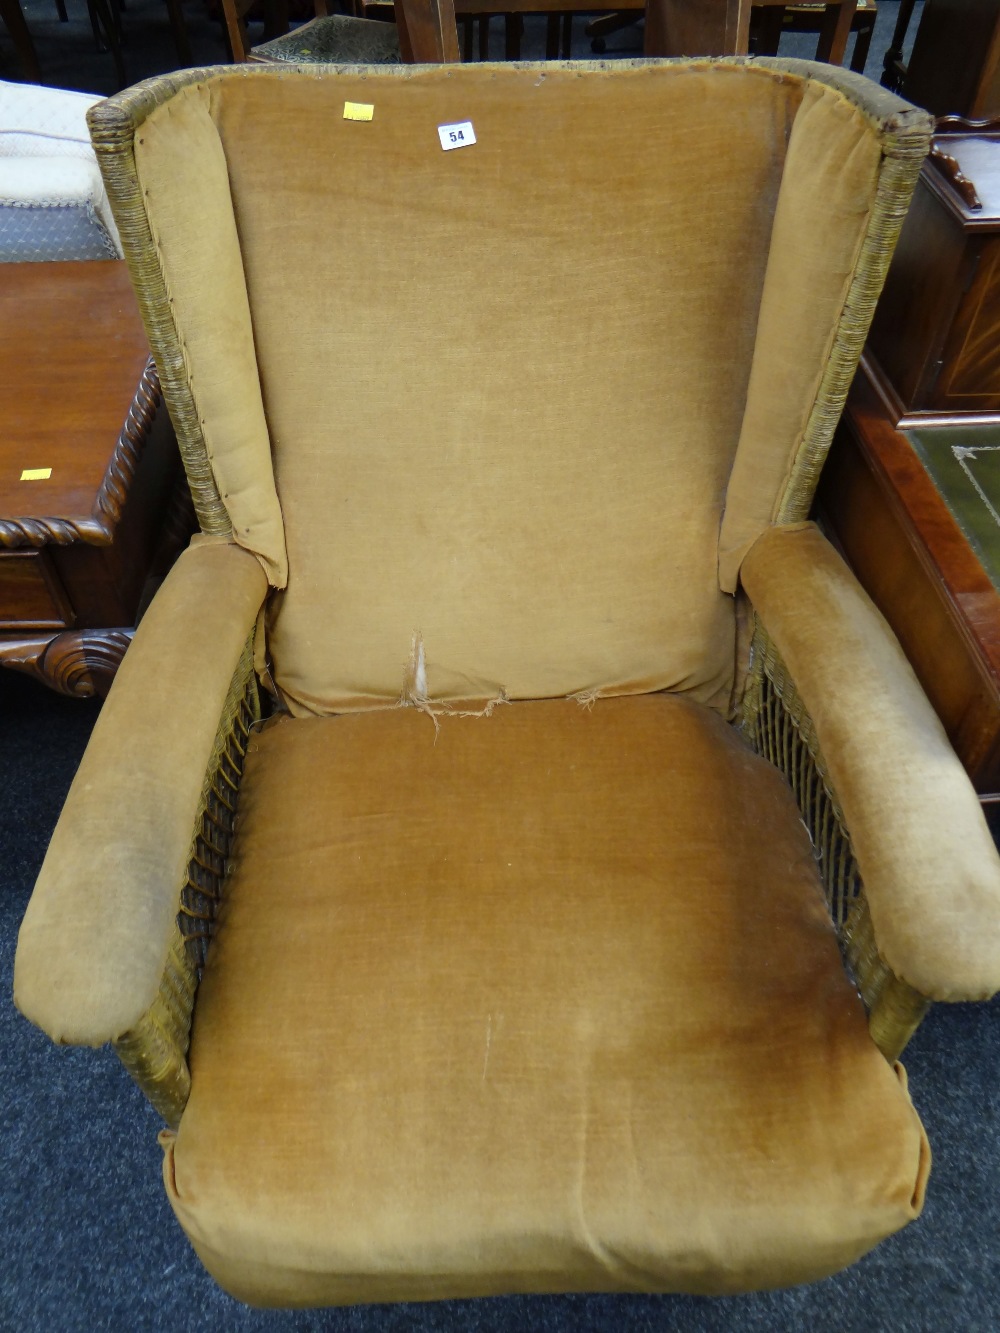 VINTAGE WICKER WING BACK ARMCHAIR with upholstered seat and arms - Image 2 of 2